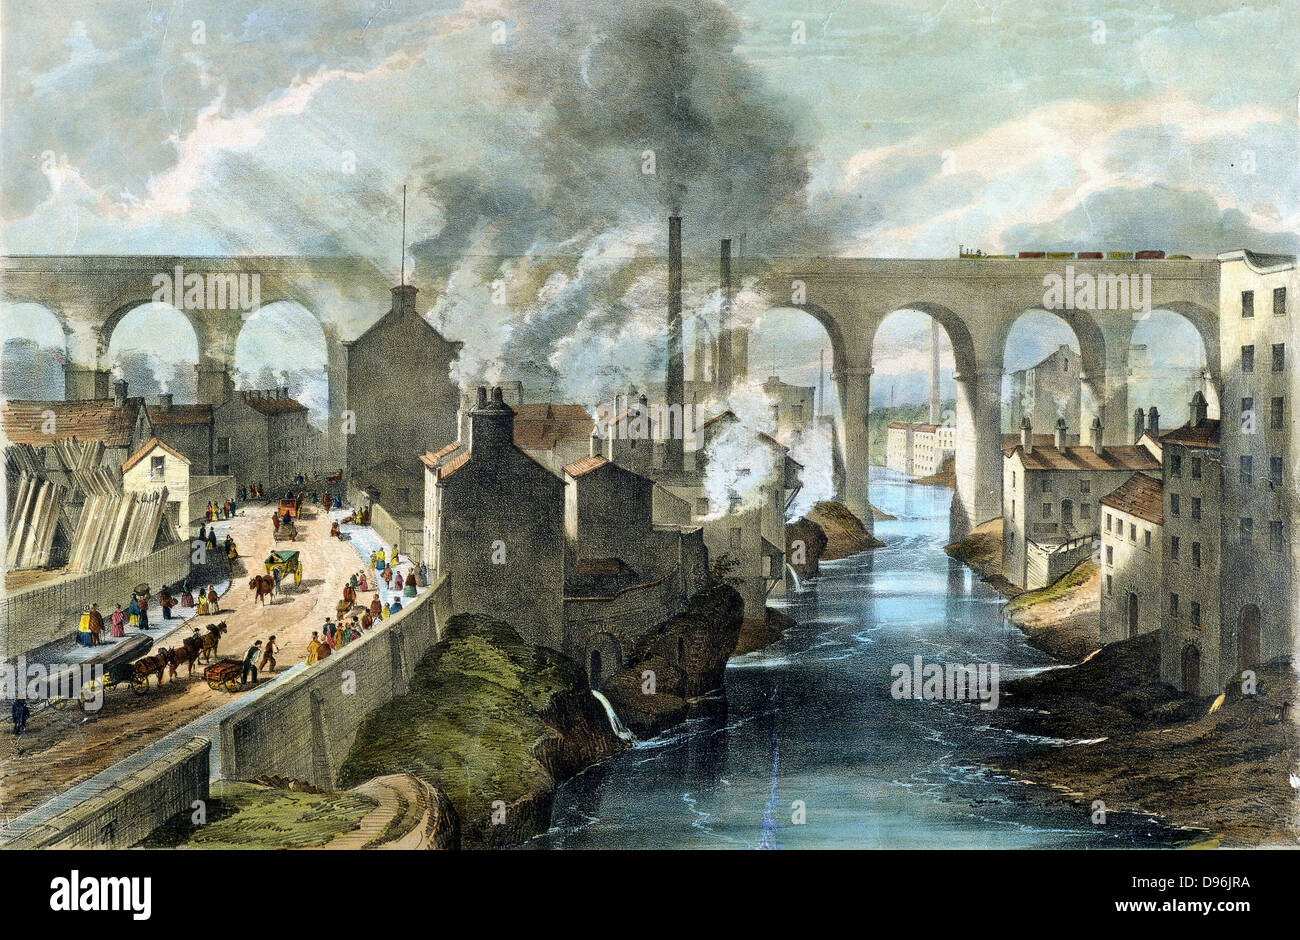 Train crossing Stockport viaduct on London & North Western Railway. Note pollution of river banks, smoking chimneys and complete domination of scene by railway viaduct. Pedestrian and horse traffic on left. Lithograph c1845 Stock Photo